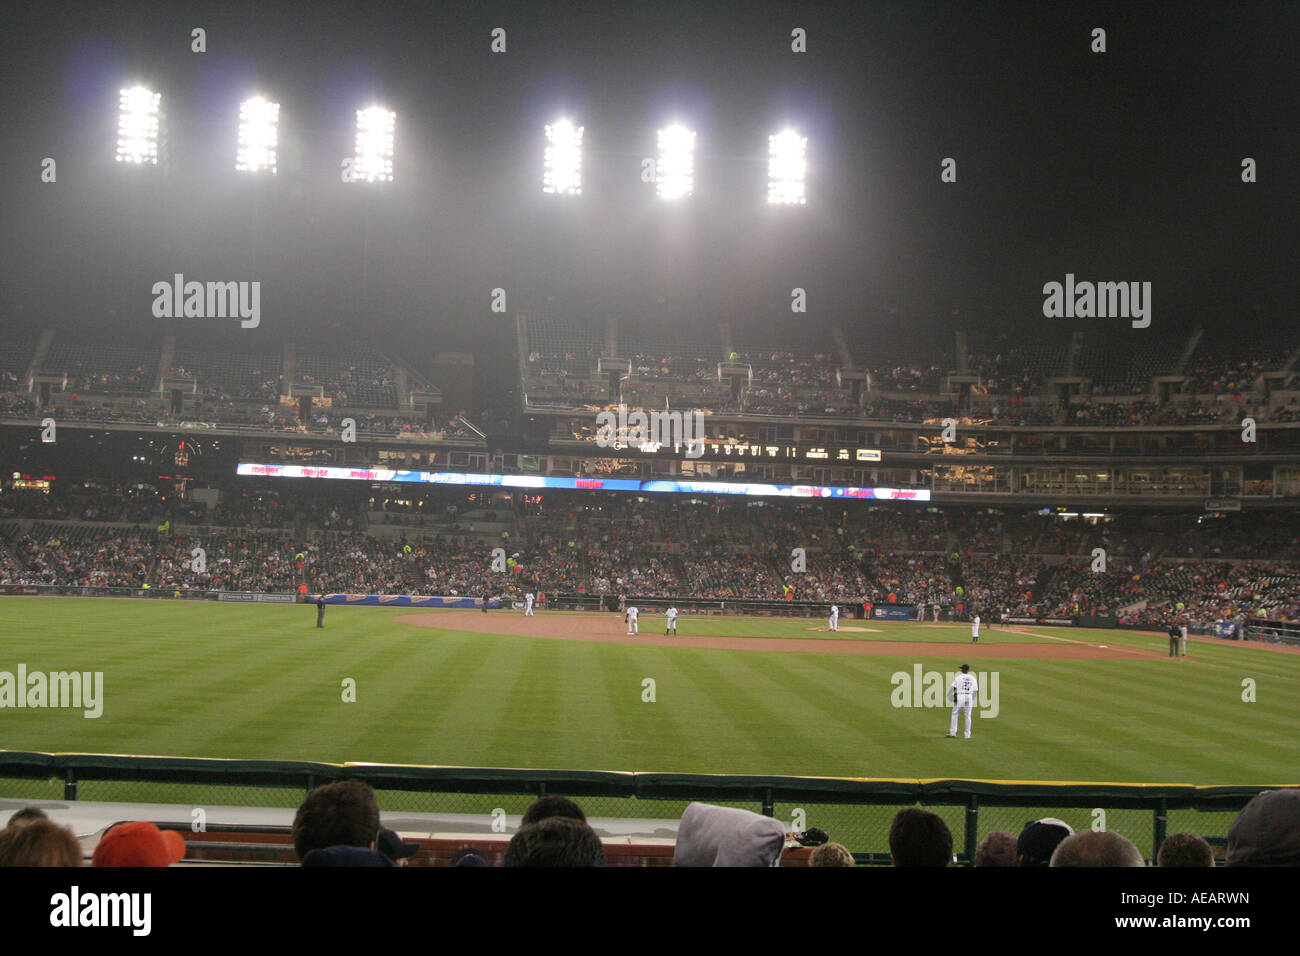 Comerica Park under the lights during a night game Stock Photo